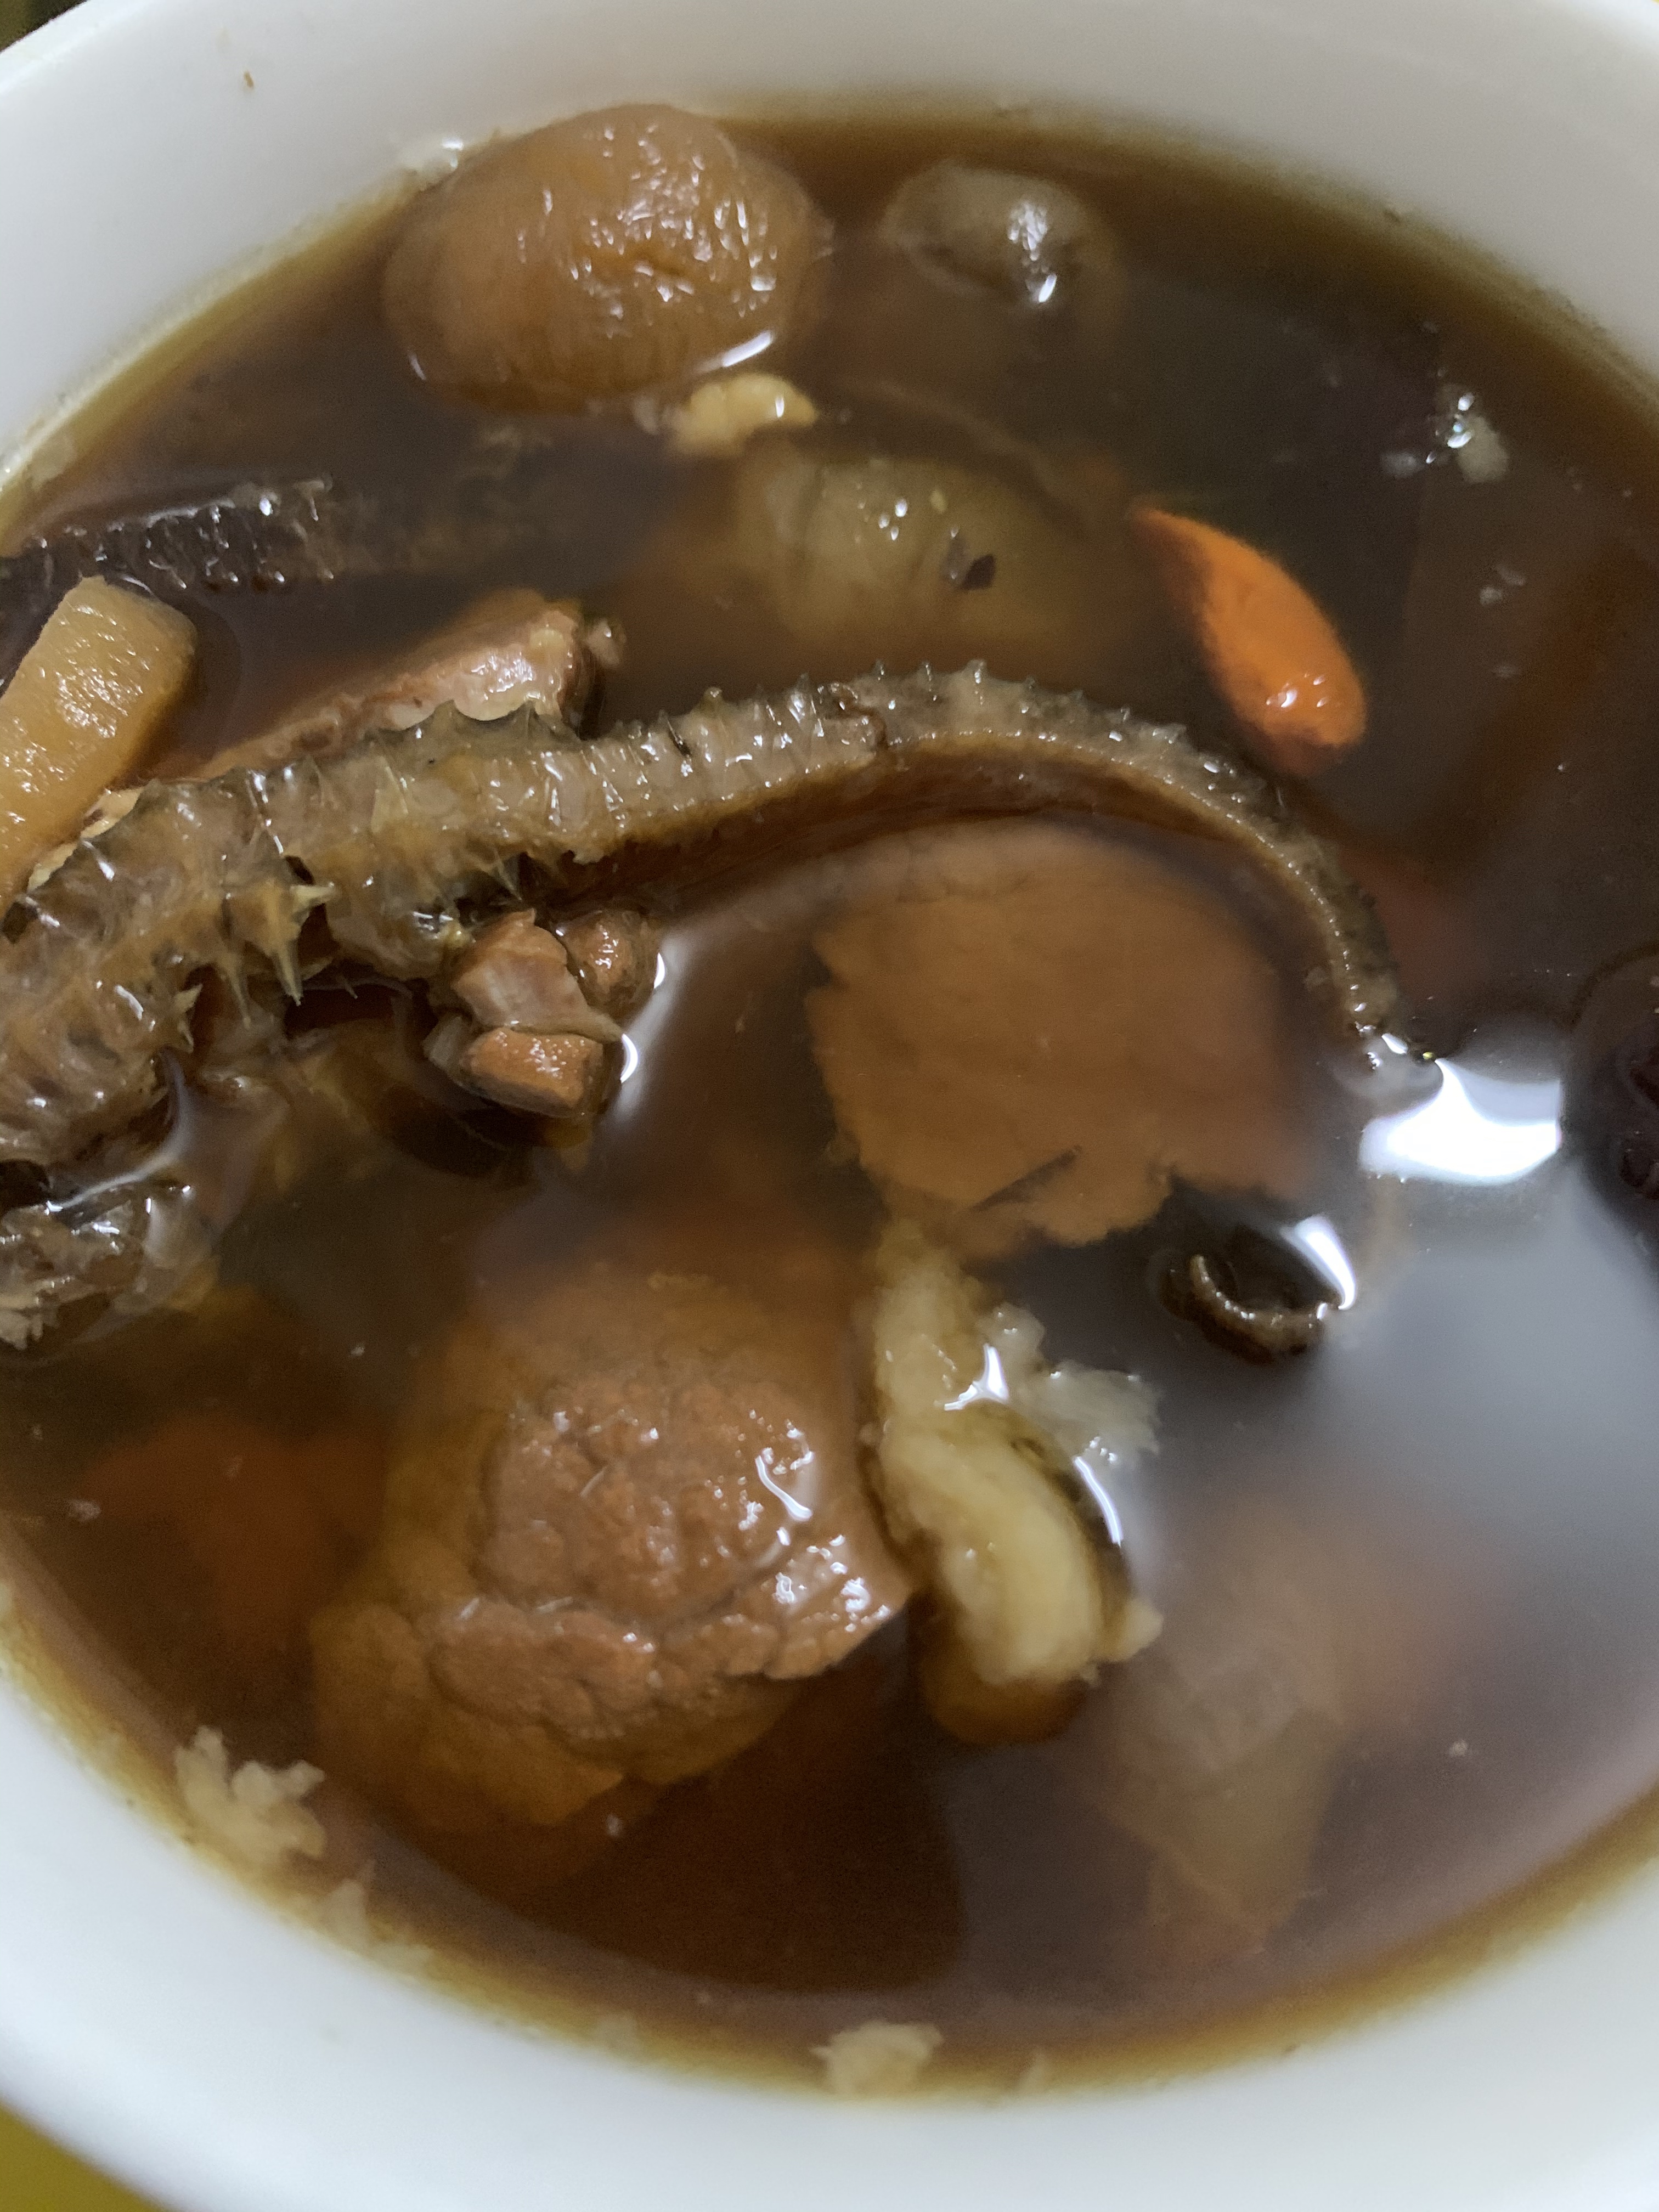 
The sea horse that suits a schoolgirl more is nourishing the practice of soup